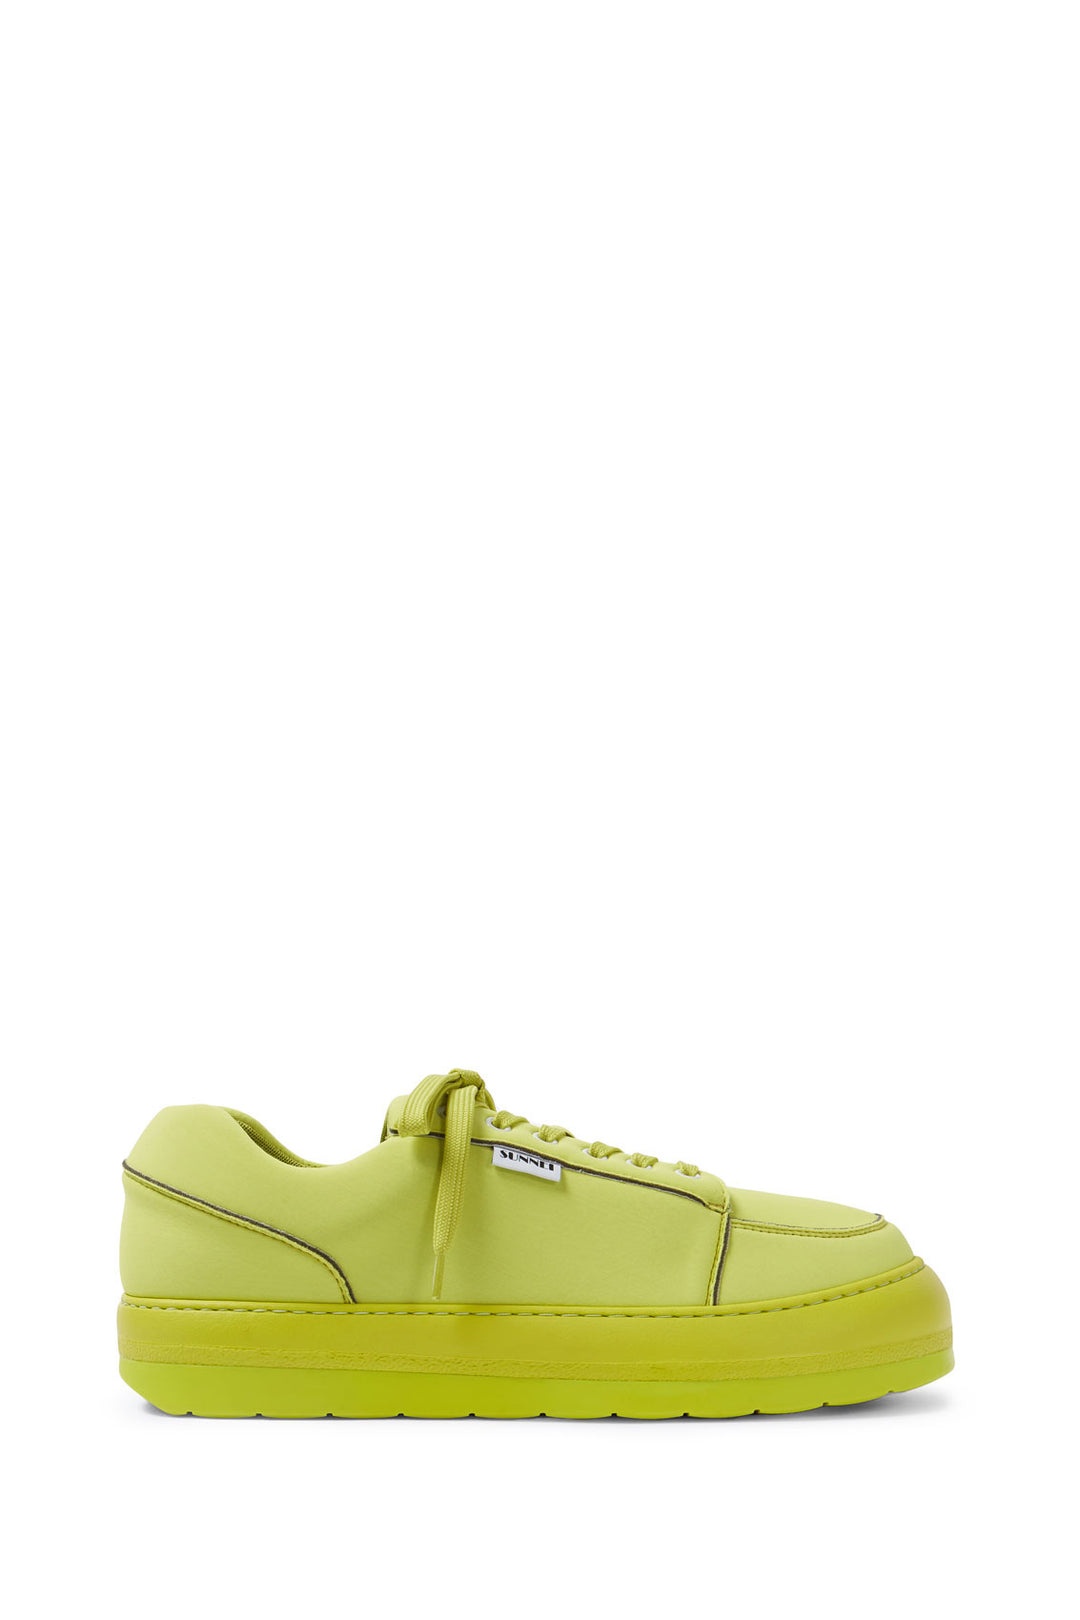 TOTAL LIME NEOPRENE DREAMY SHOES - 1